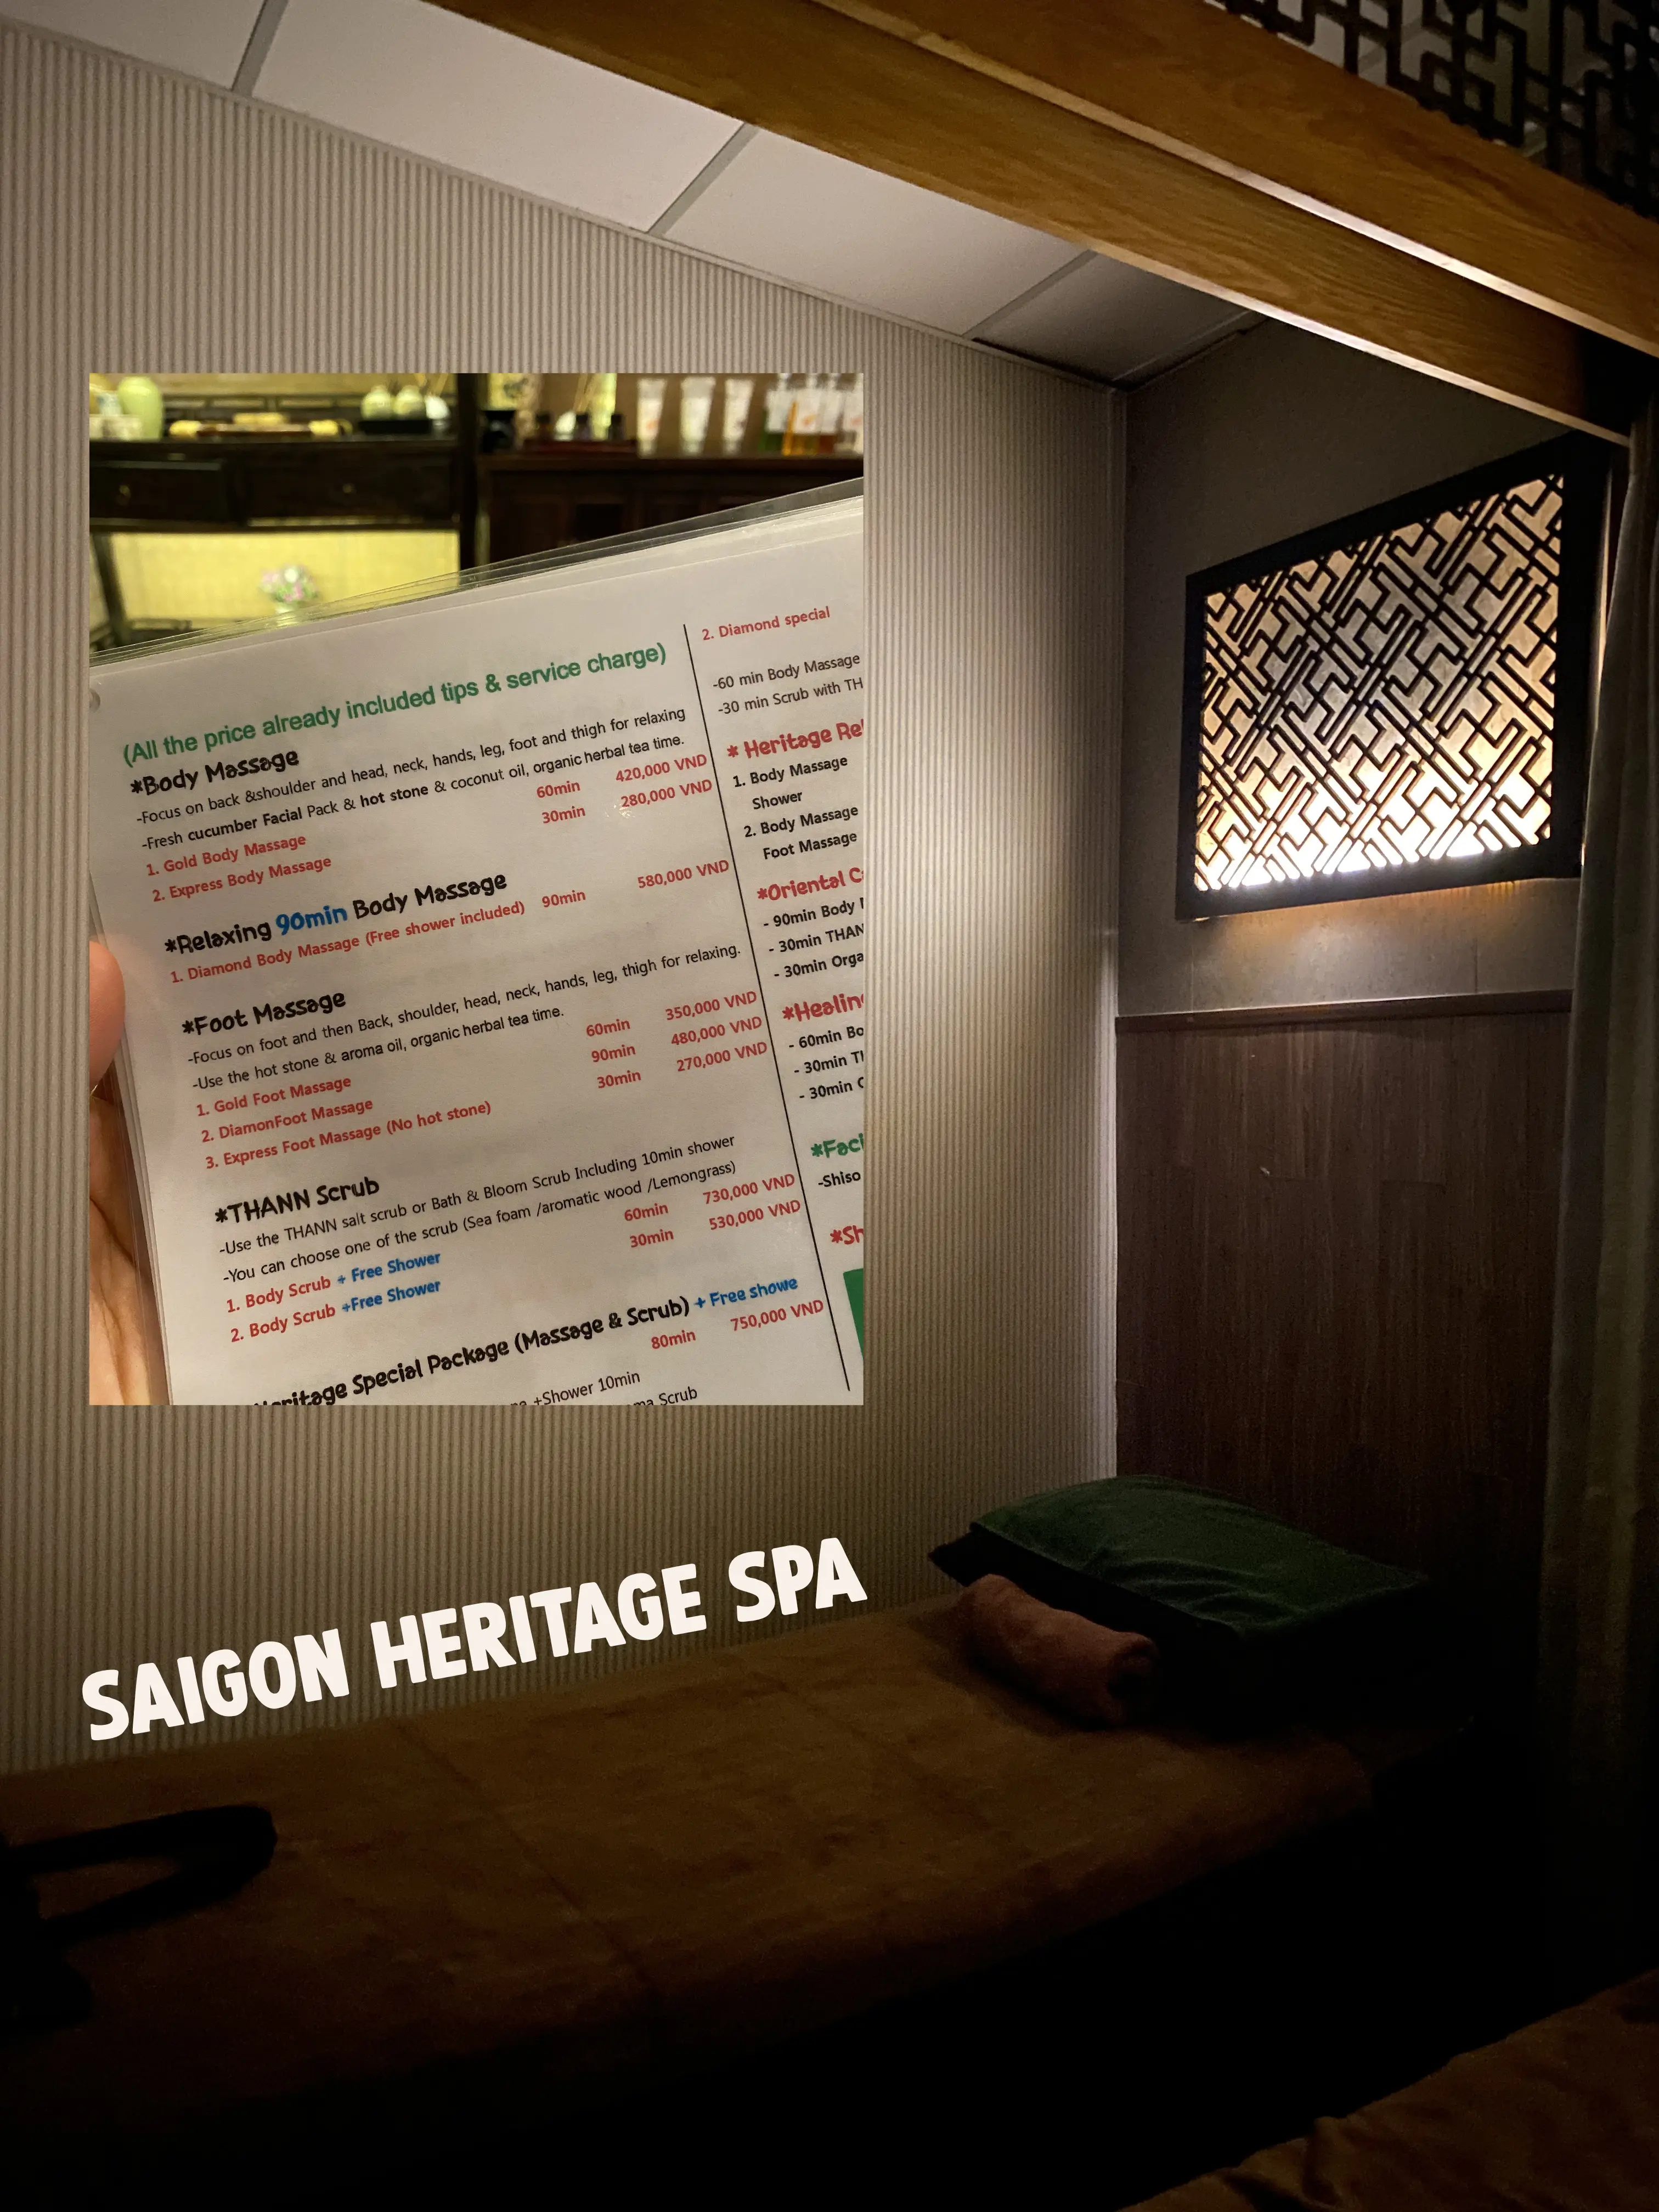 cheap and good massage spots in ho chi minh! 💆‍♀️'s images(1)